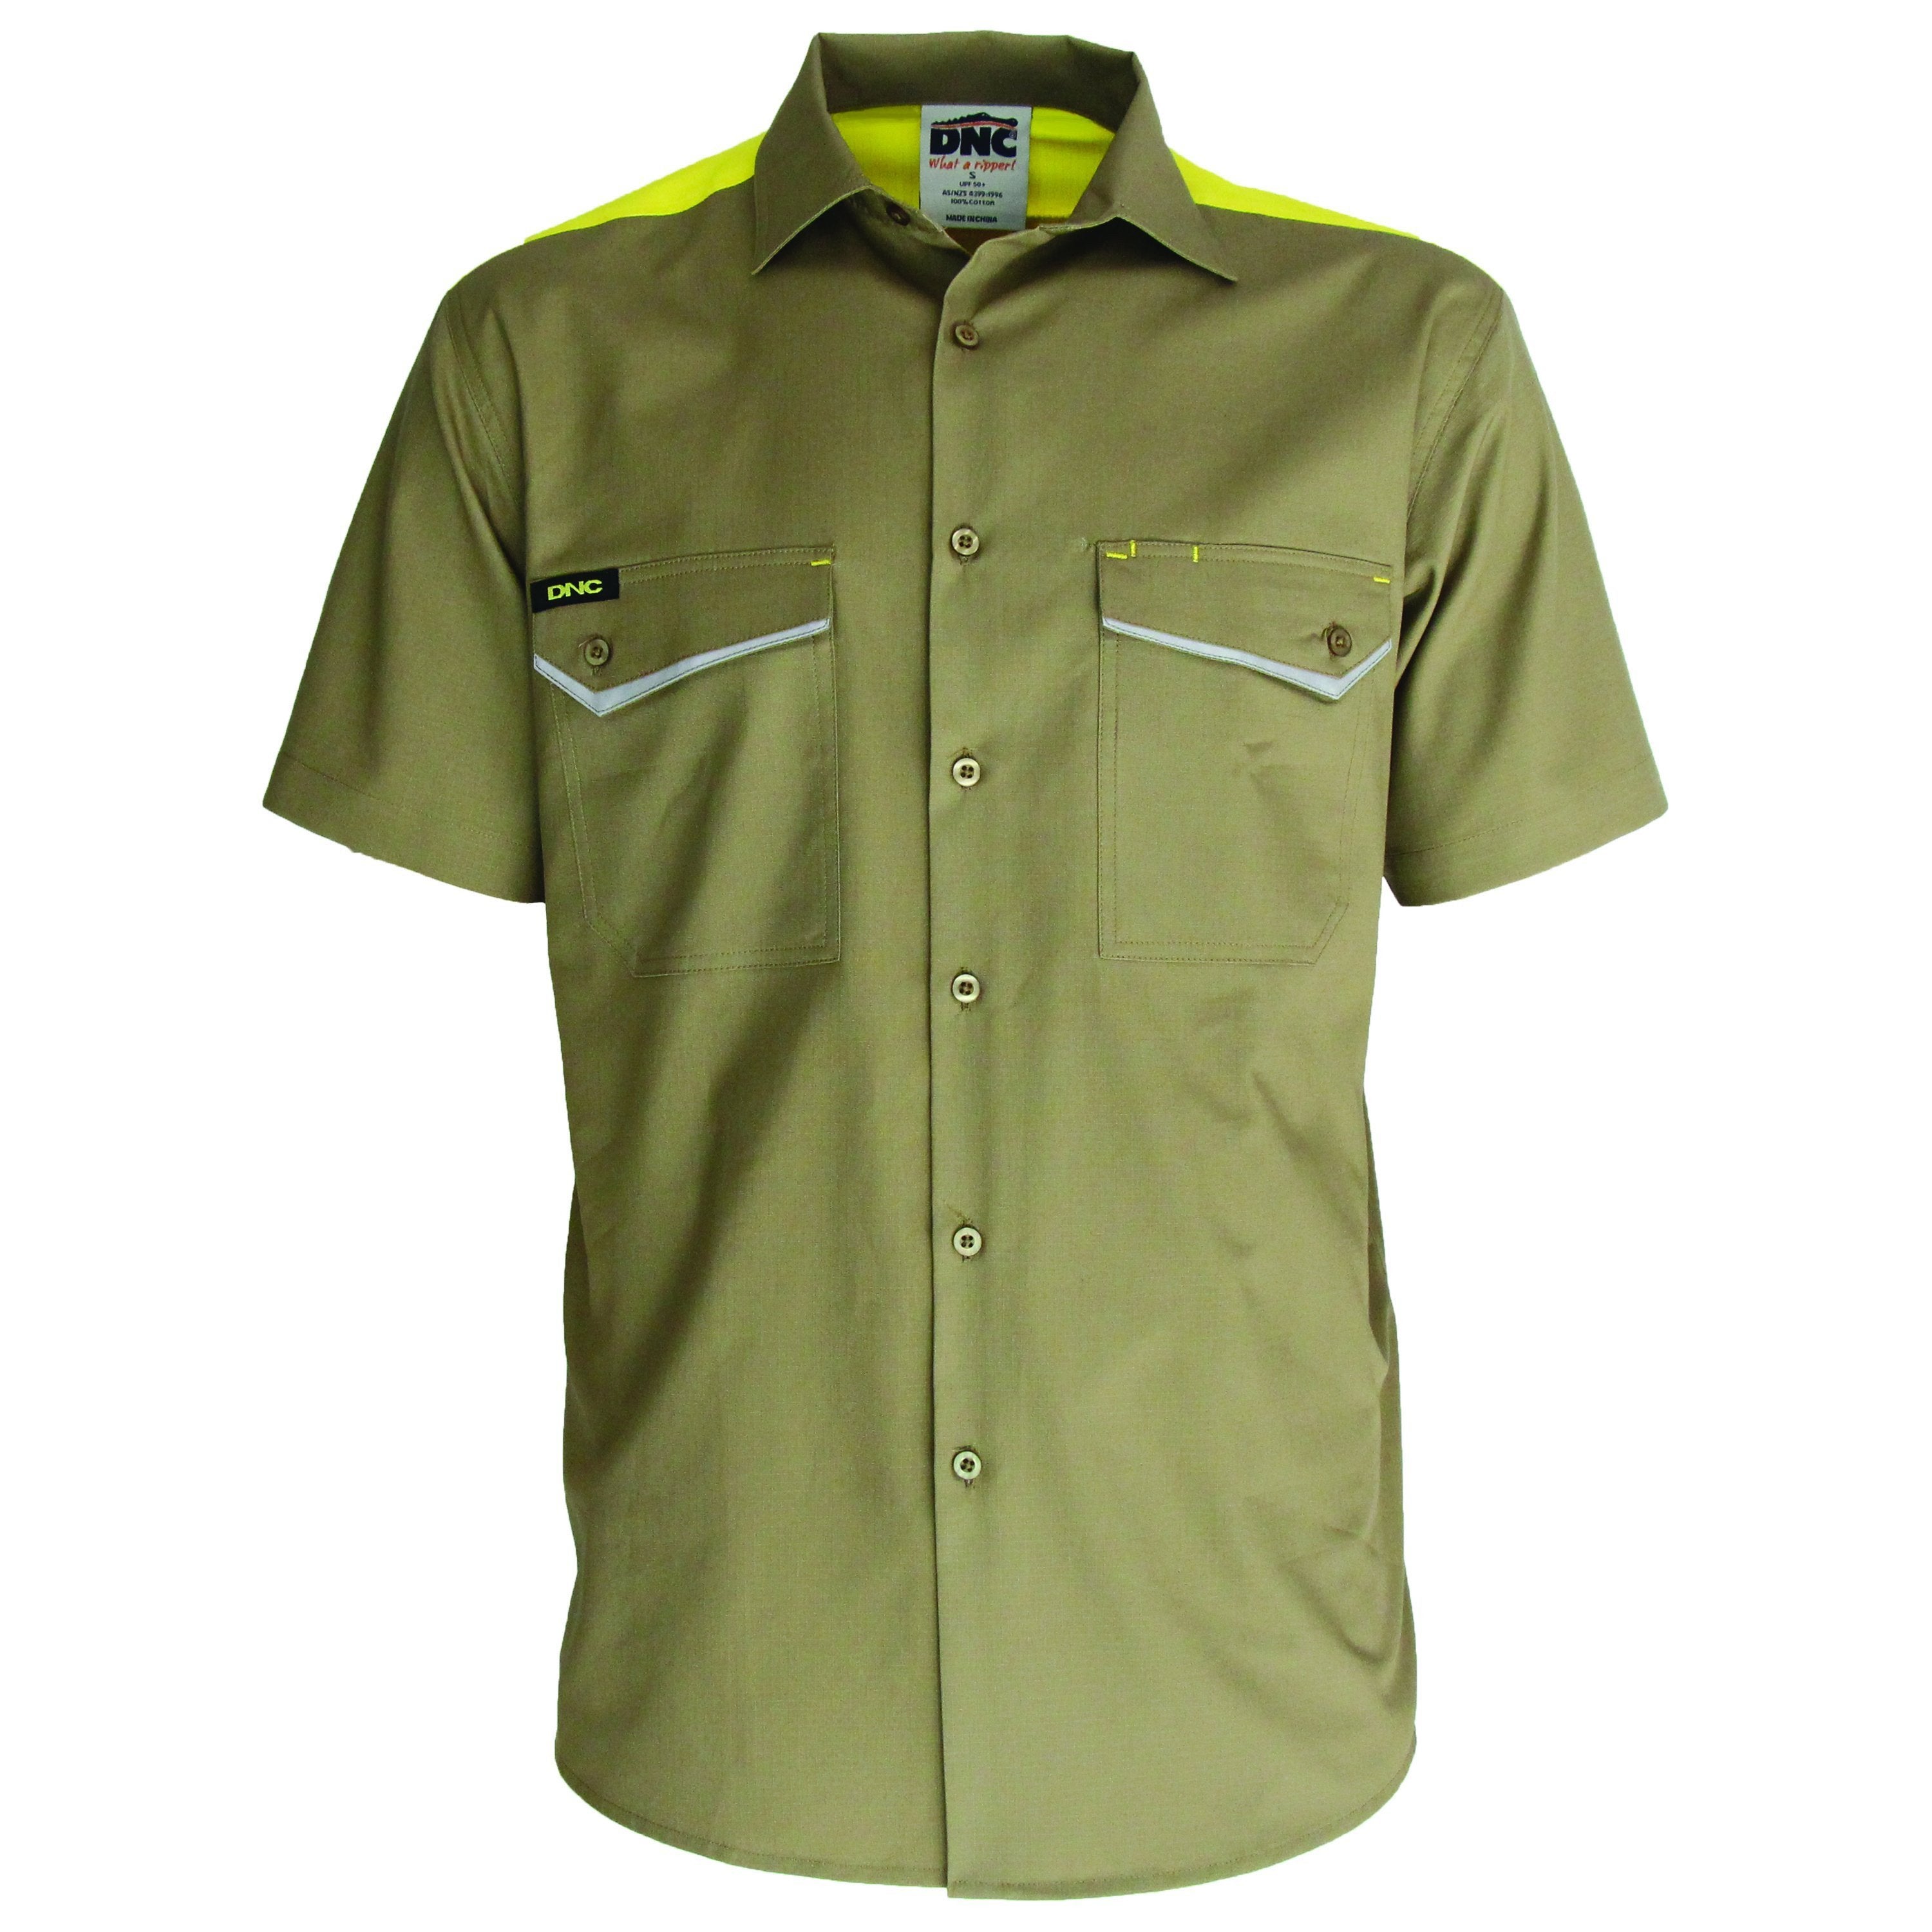 RipStop Cool Cotton S/S Tradies Shirt